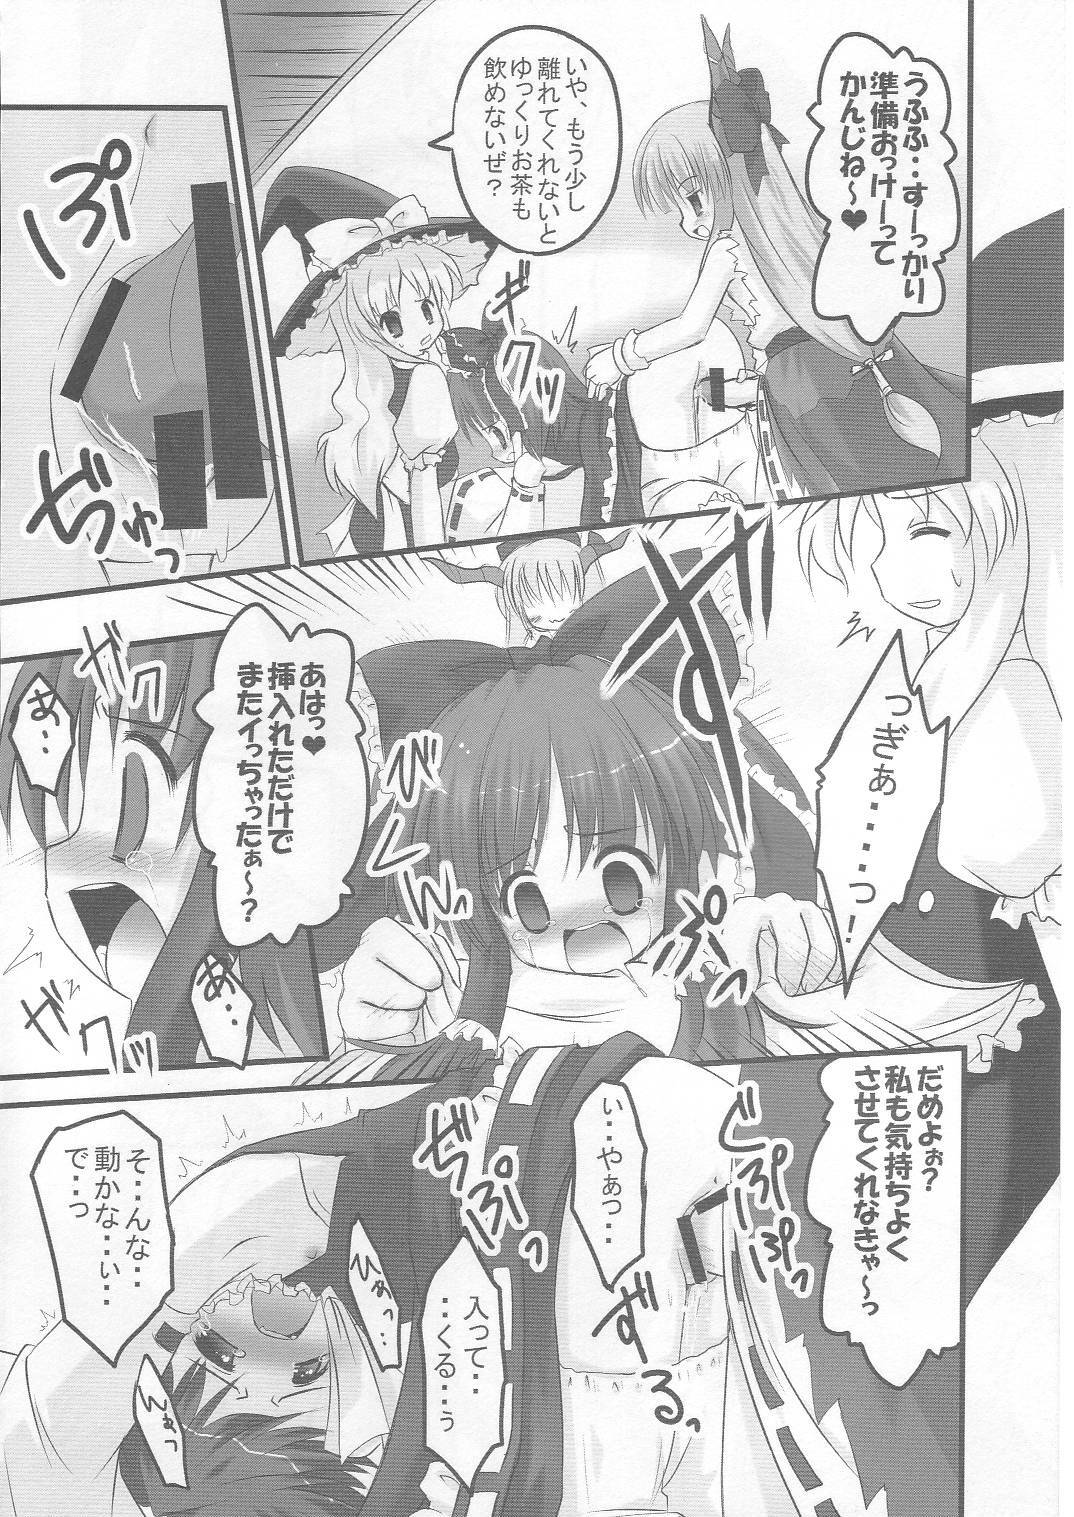 (SC30) [HappyBirthday (Maruchan., Monchy)] REDEMPTION (Touhou Project) page 25 full